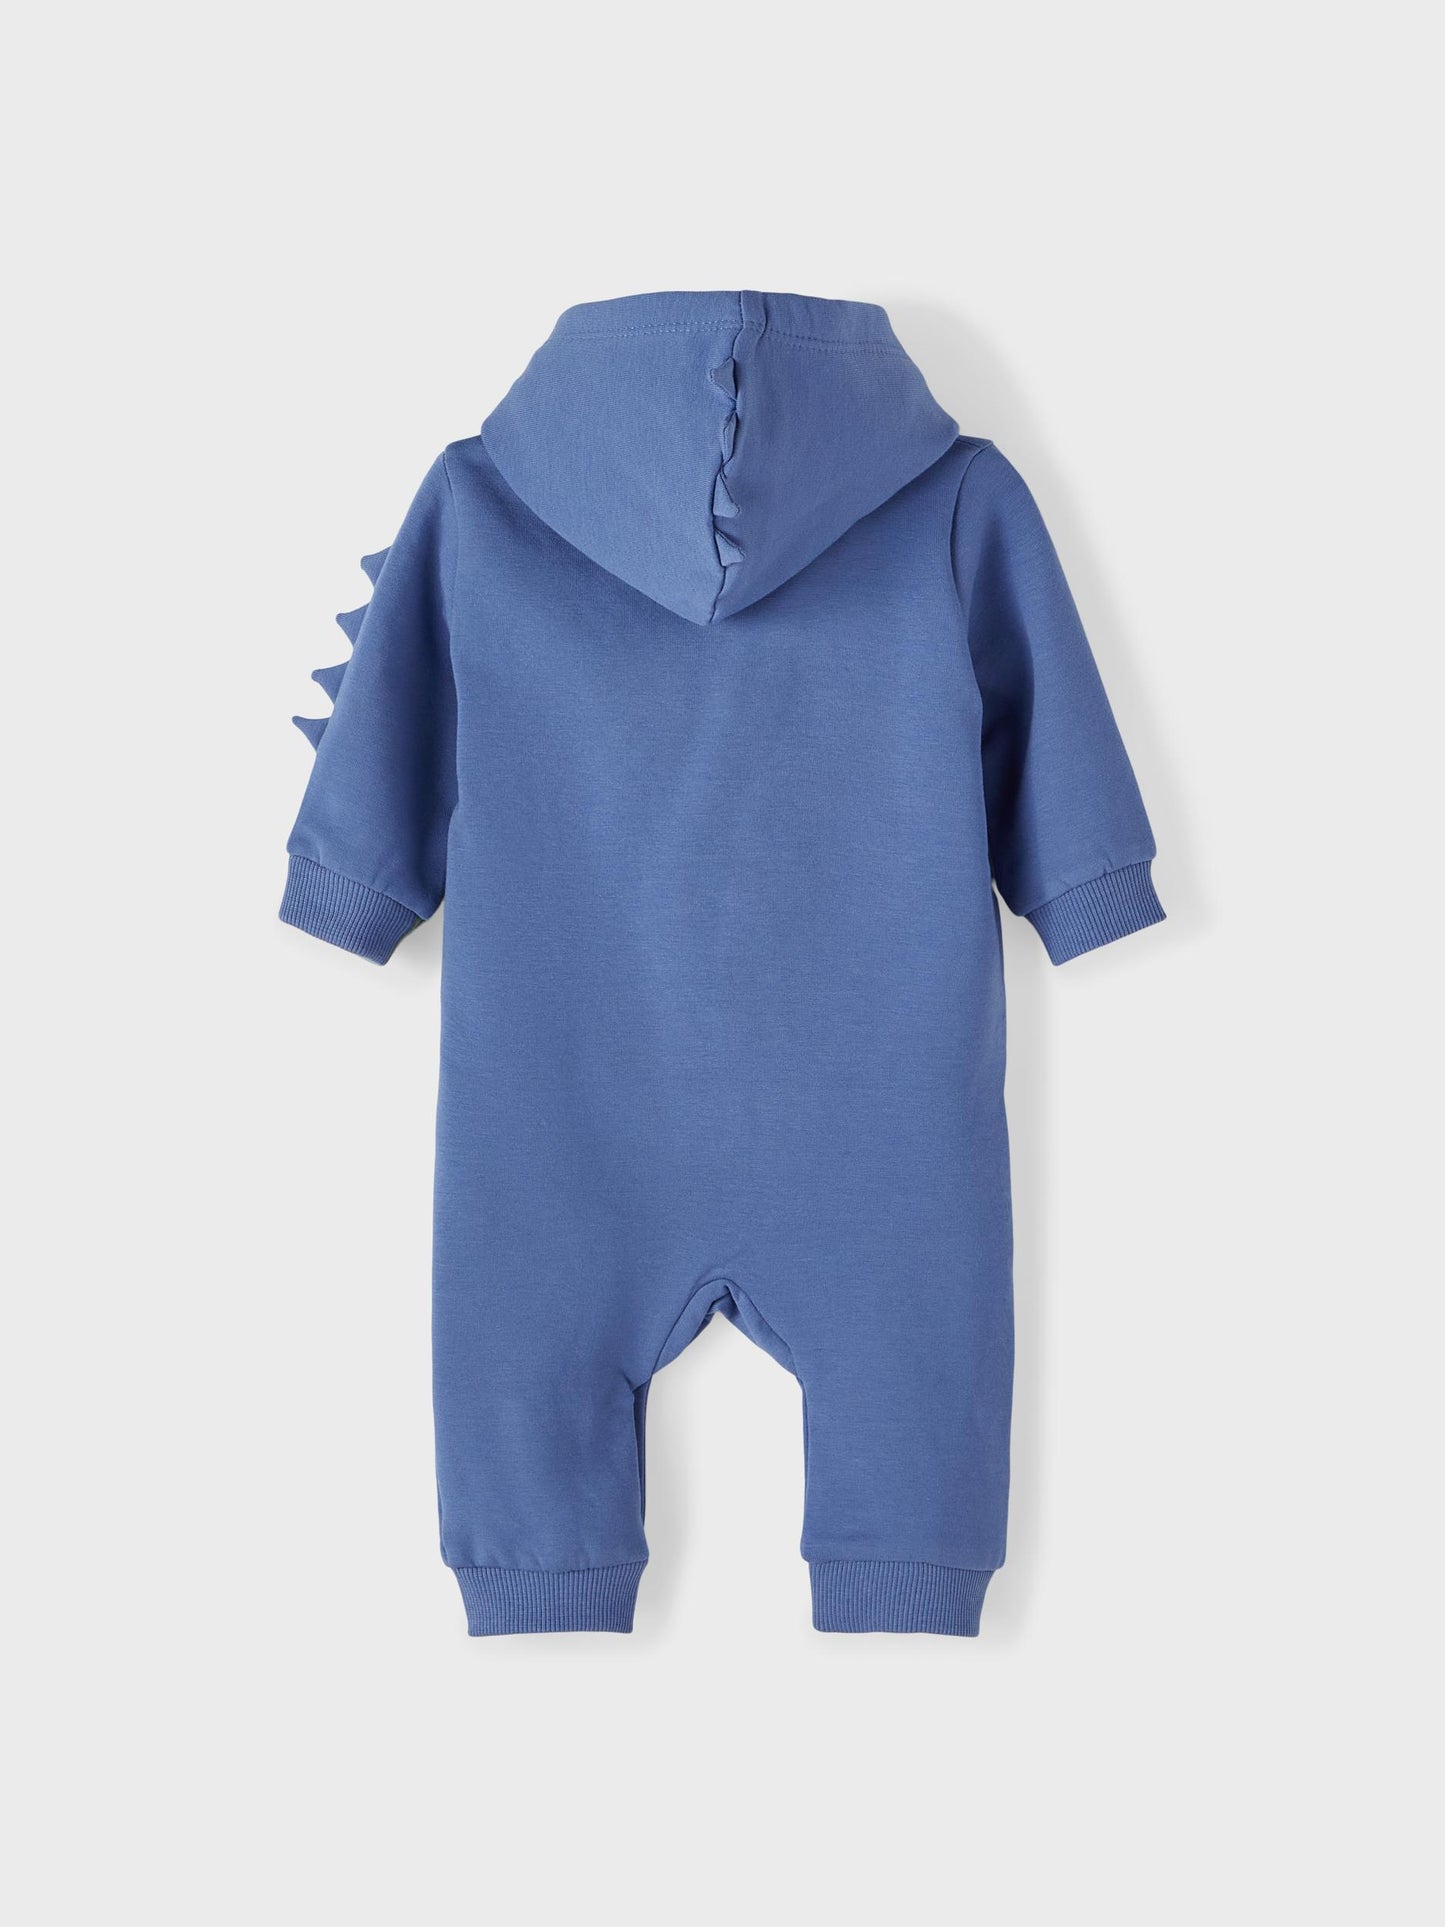 Dino onepiece baby